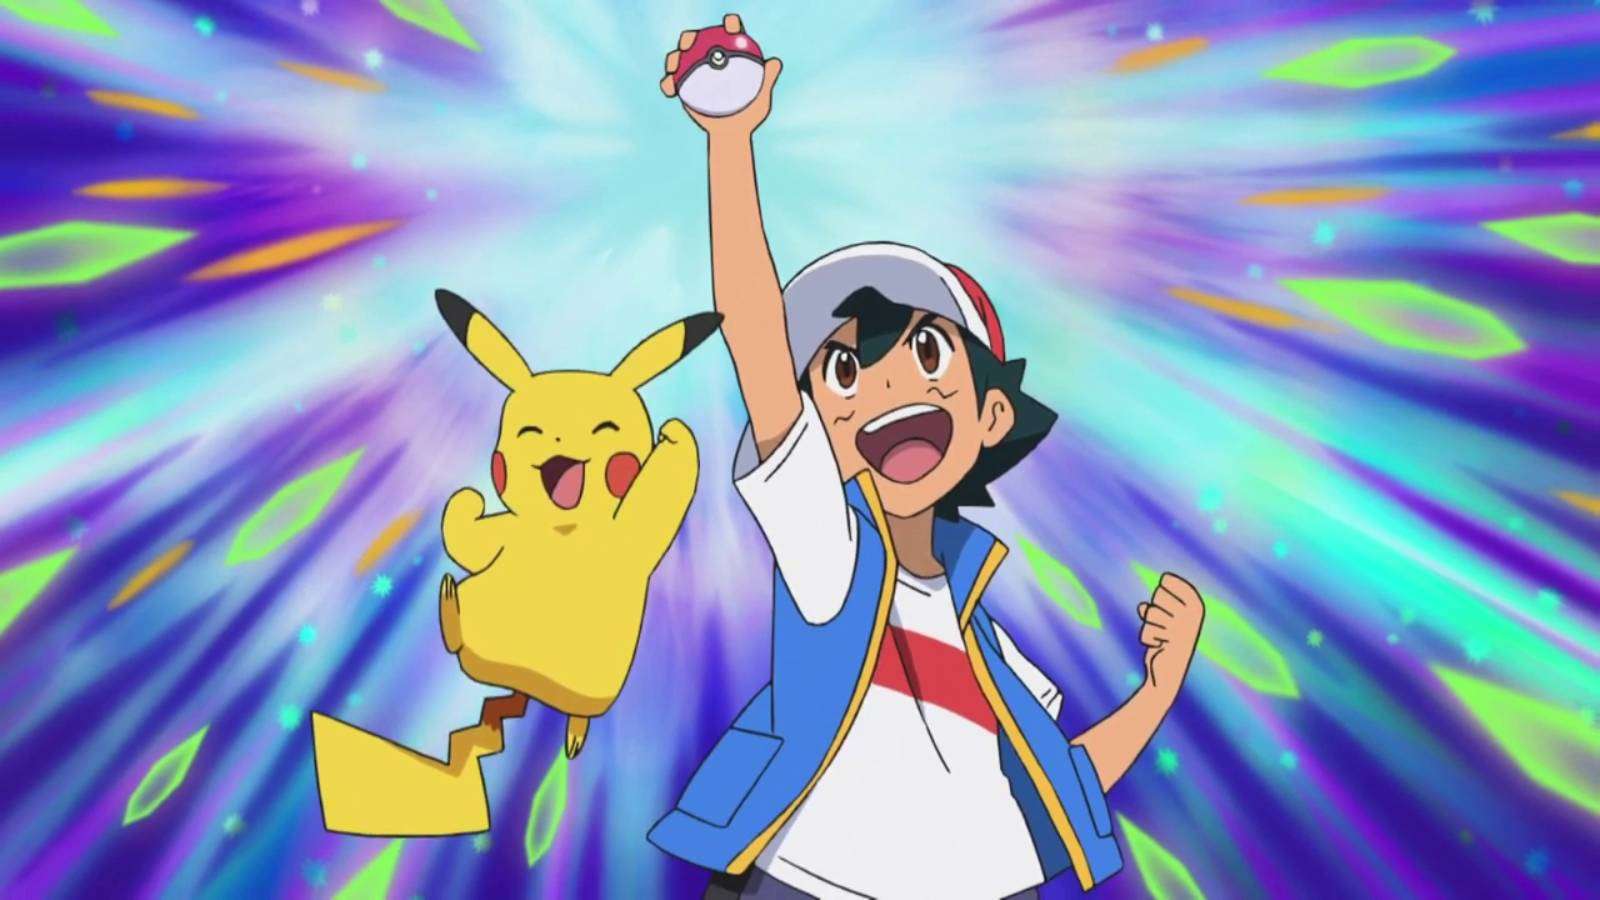 Pokemon trainer Ash Ketchum holds up a Poke ball triumphantly, while his Pokemon Pikachu joyously leaps into the air to his right